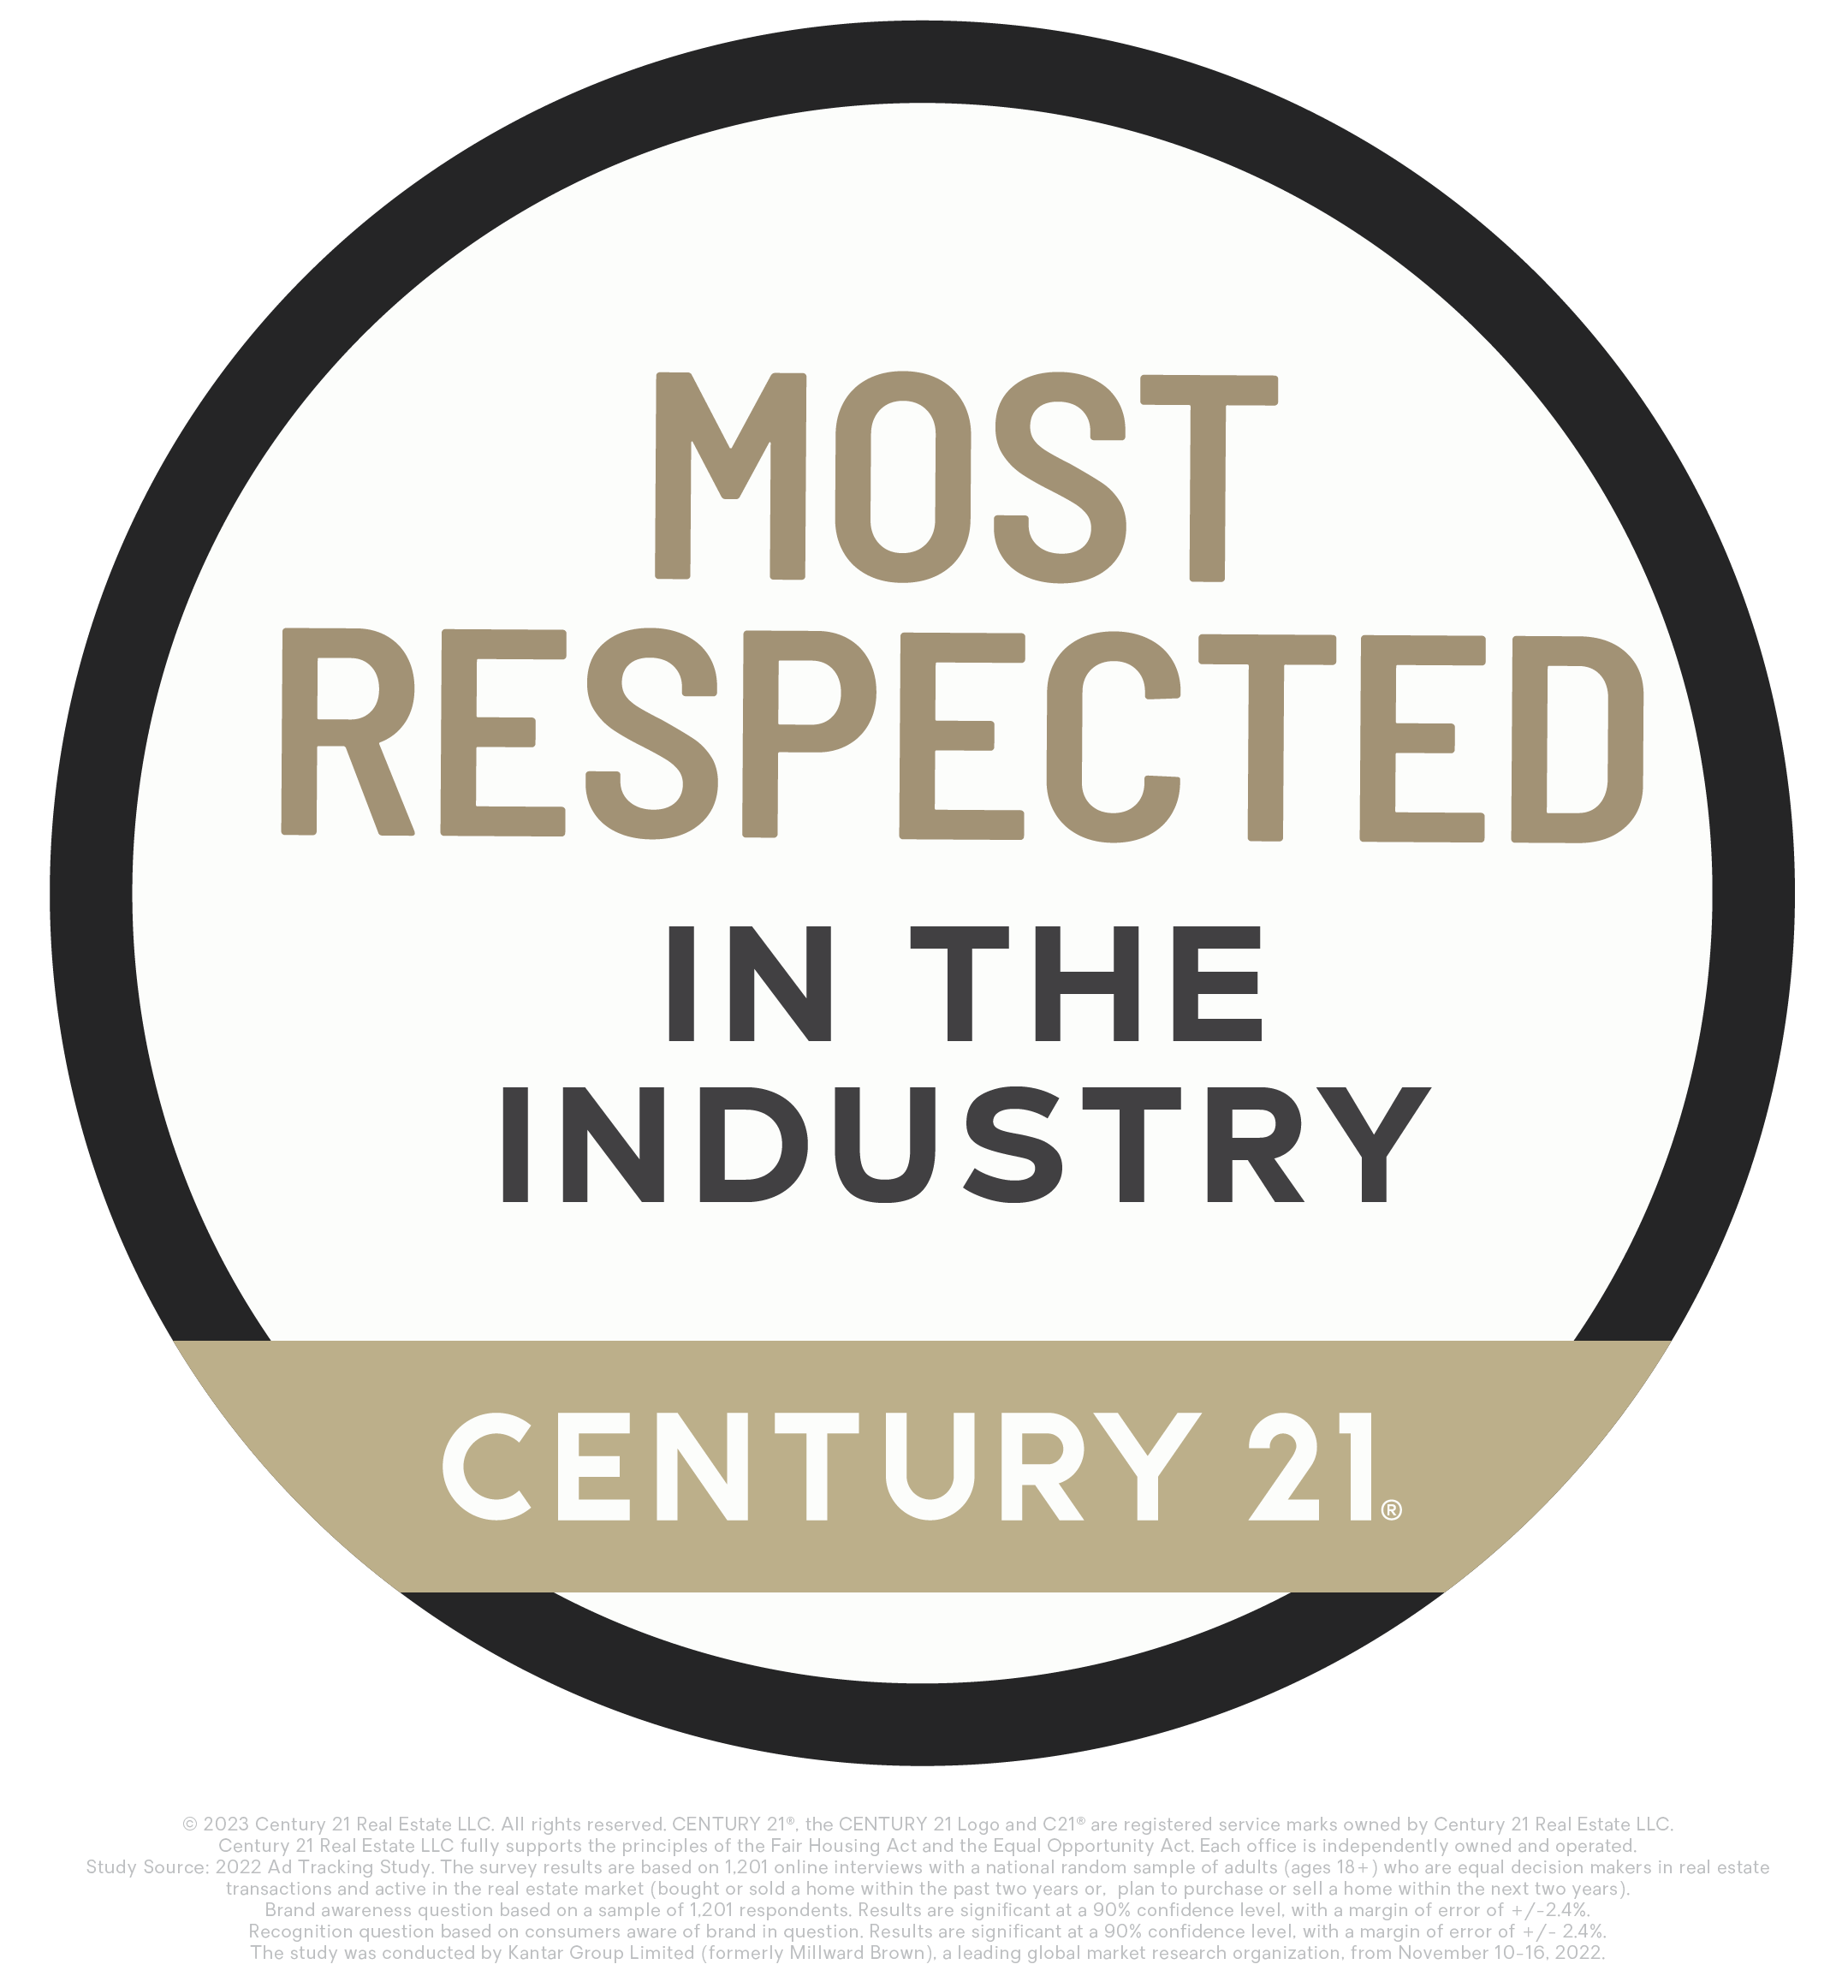 c21 most respected in the industry